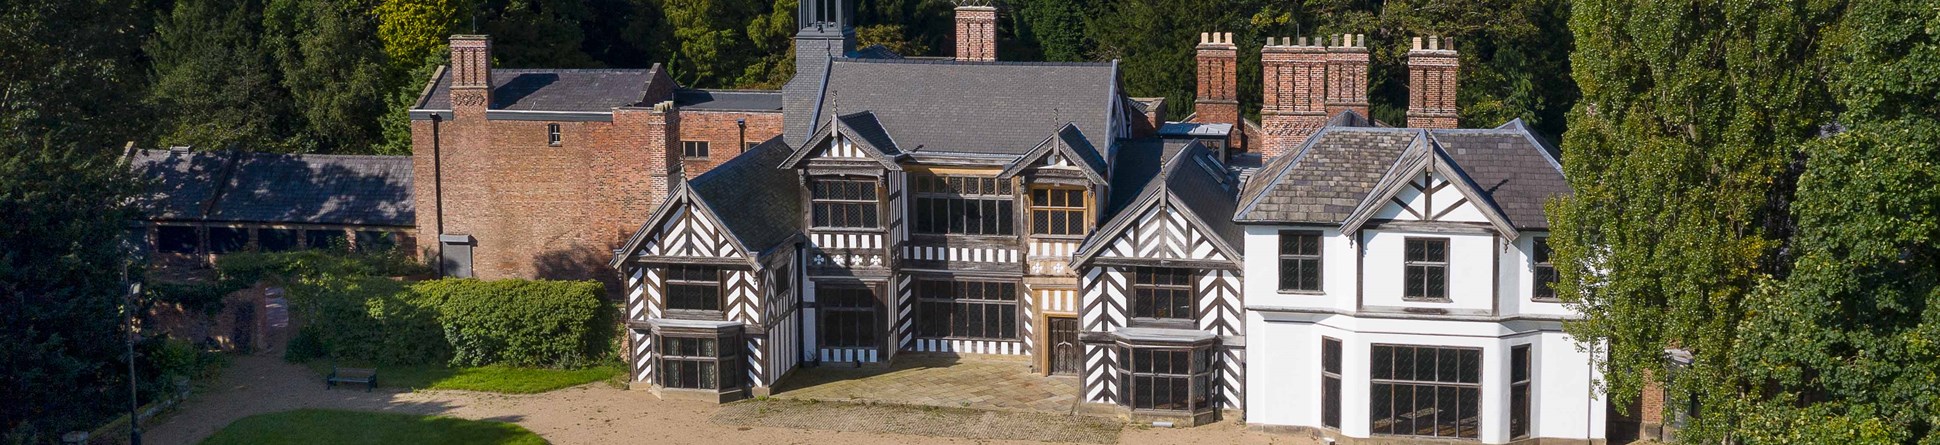 Exterior, east elevation, drone image showing hall after conservation/ restoration work following the arson attack in March 2016. View from east. 16th century stately home with lawns and gravel in foreground. Woods in background.